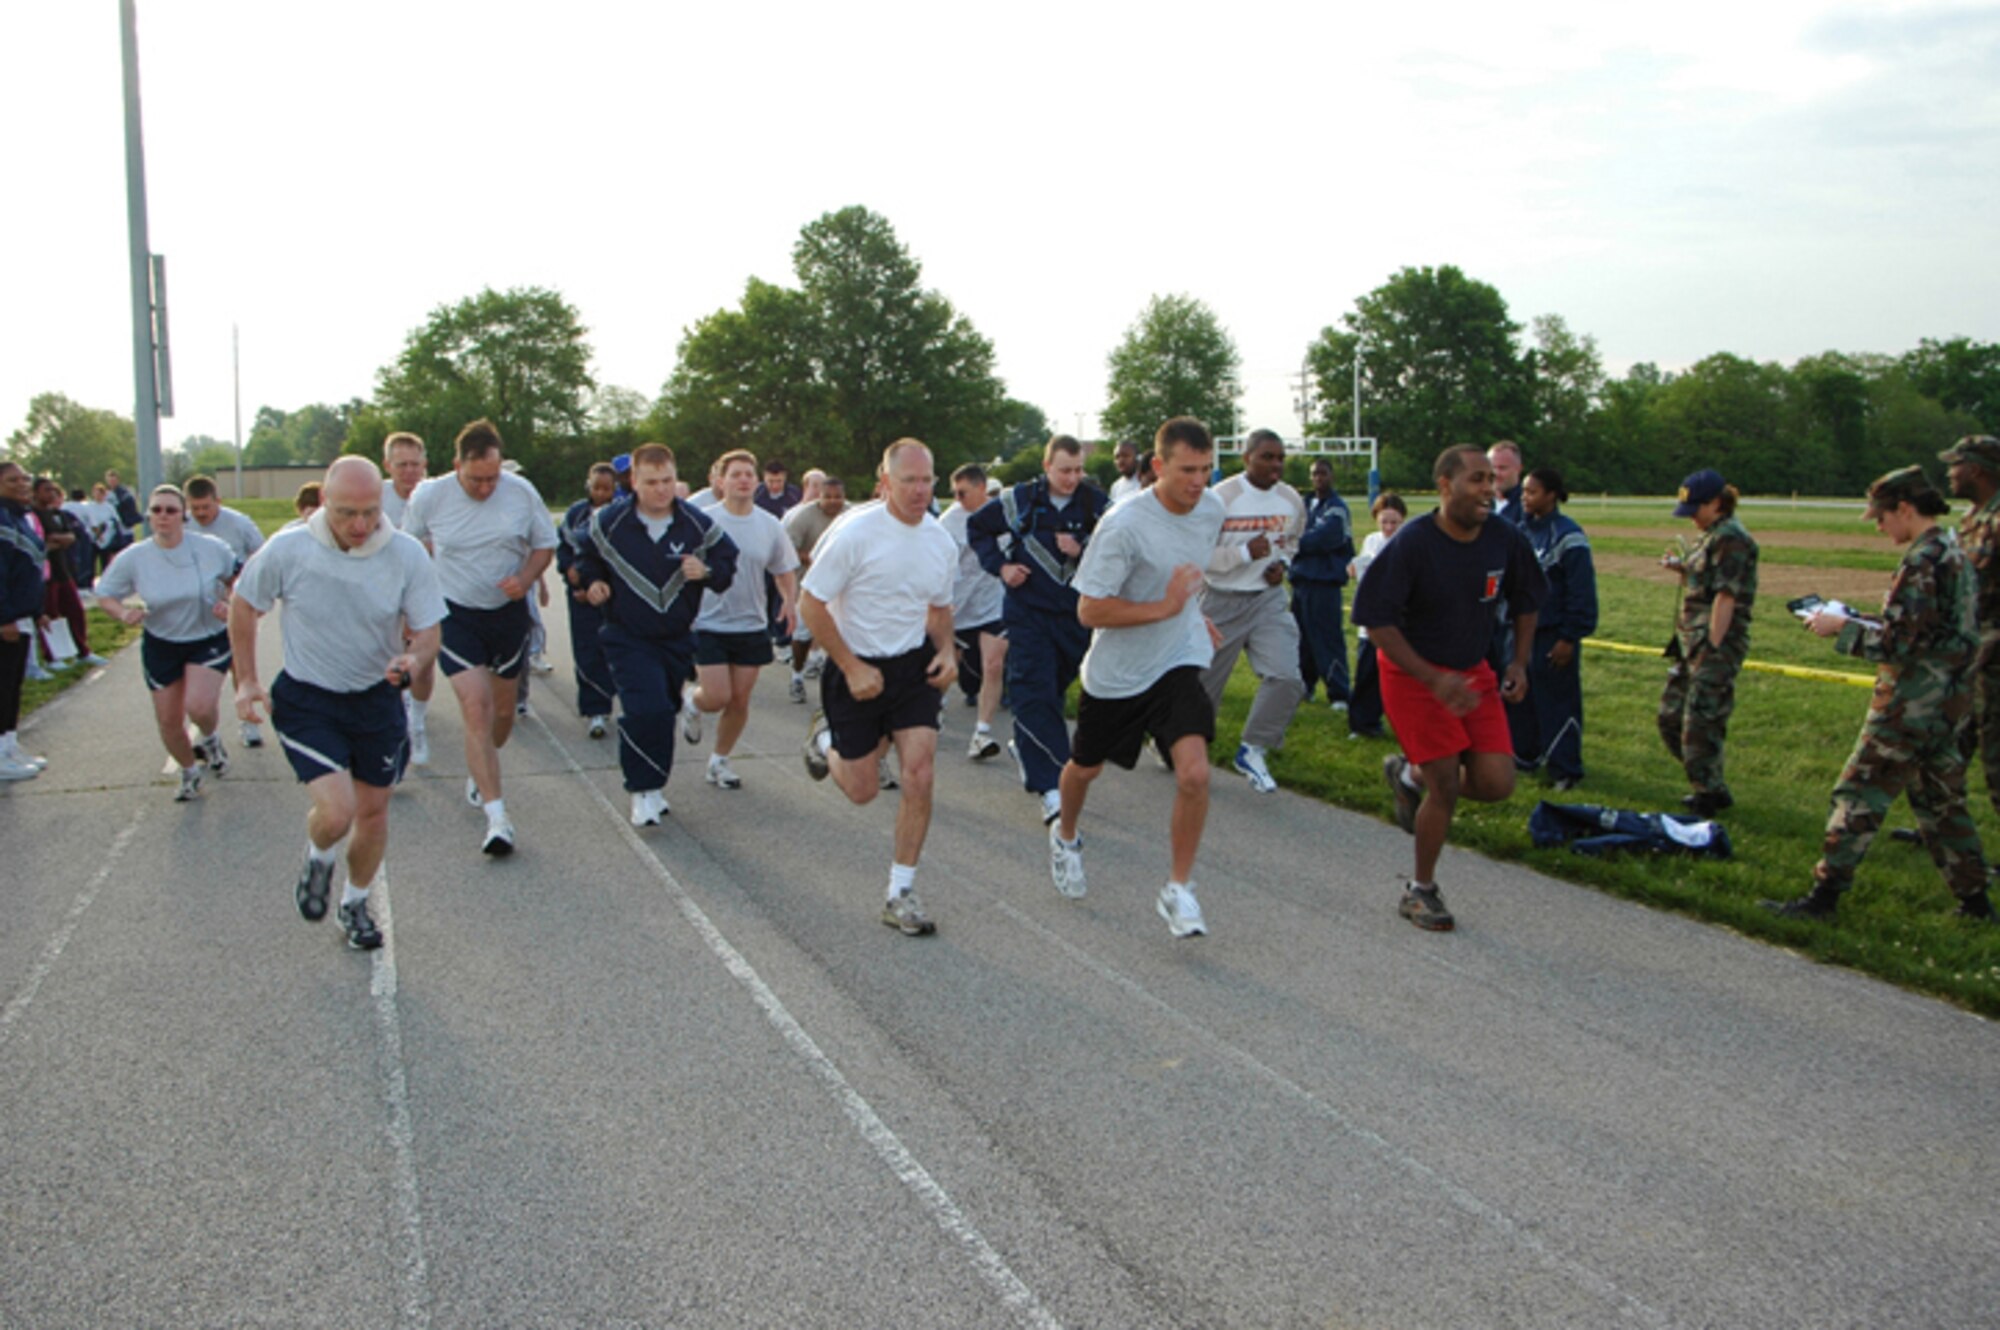 SCOTT AIR FORCE BASE, Ill. - Physical training was on everyone's task list last month as Air Force Reserve Command's 932nd Medical Squadron members completed their run, push ups and sit ups at the Scott AFB track. U.S. Air Force photo/Tech. Sgt. Christopher Parr